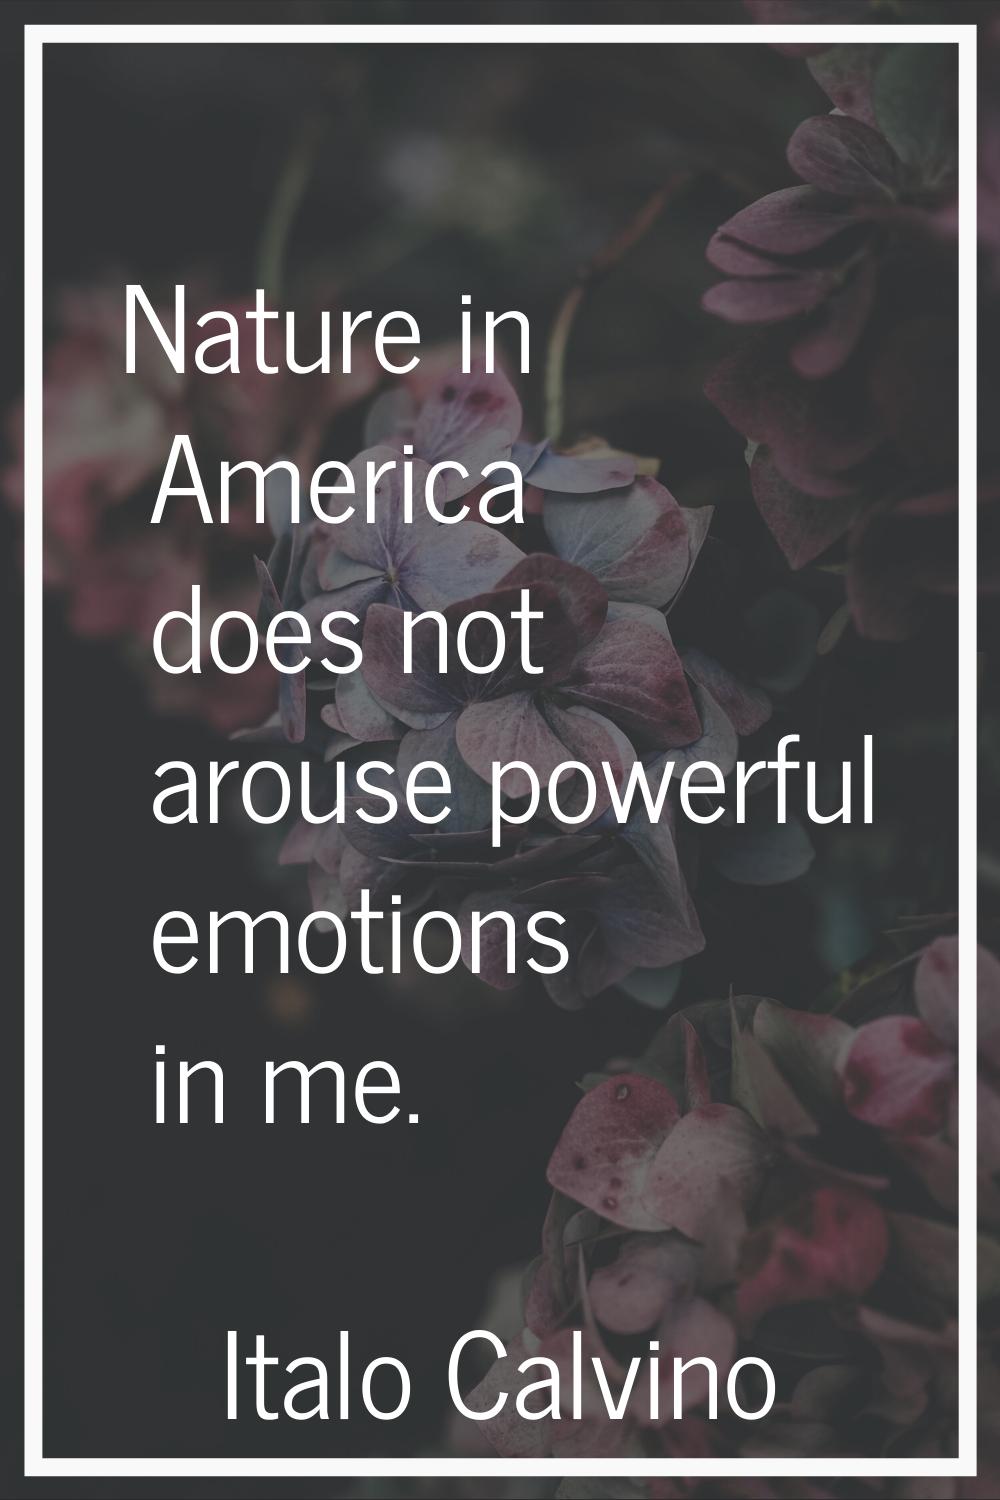 Nature in America does not arouse powerful emotions in me.